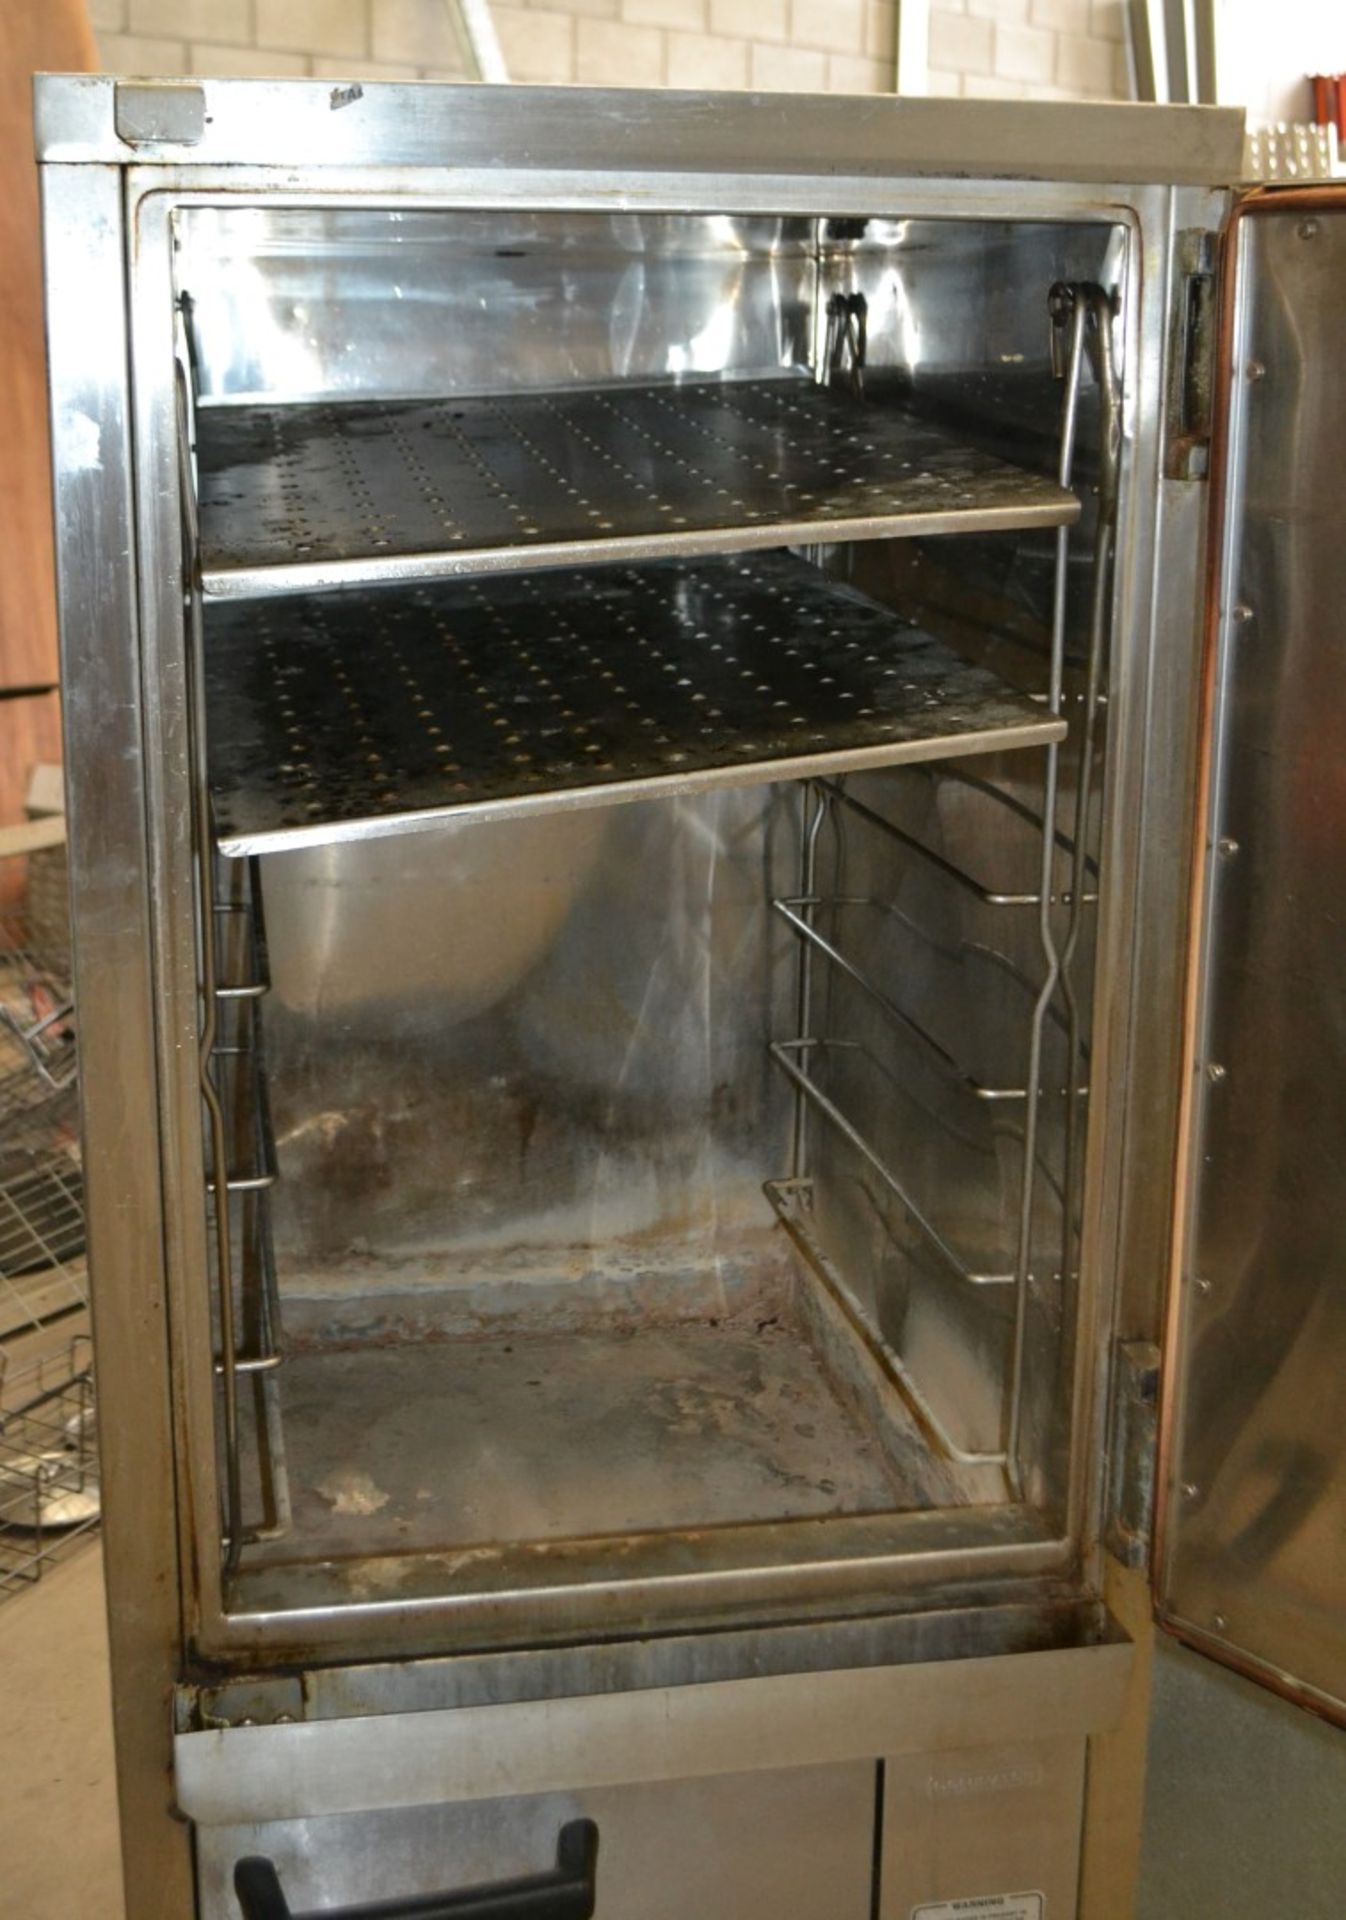 1 x Falcon Commercial Kitchen Steamer Oven - Natural Gas - Model G6478 - CL435 - Location: - Image 3 of 6